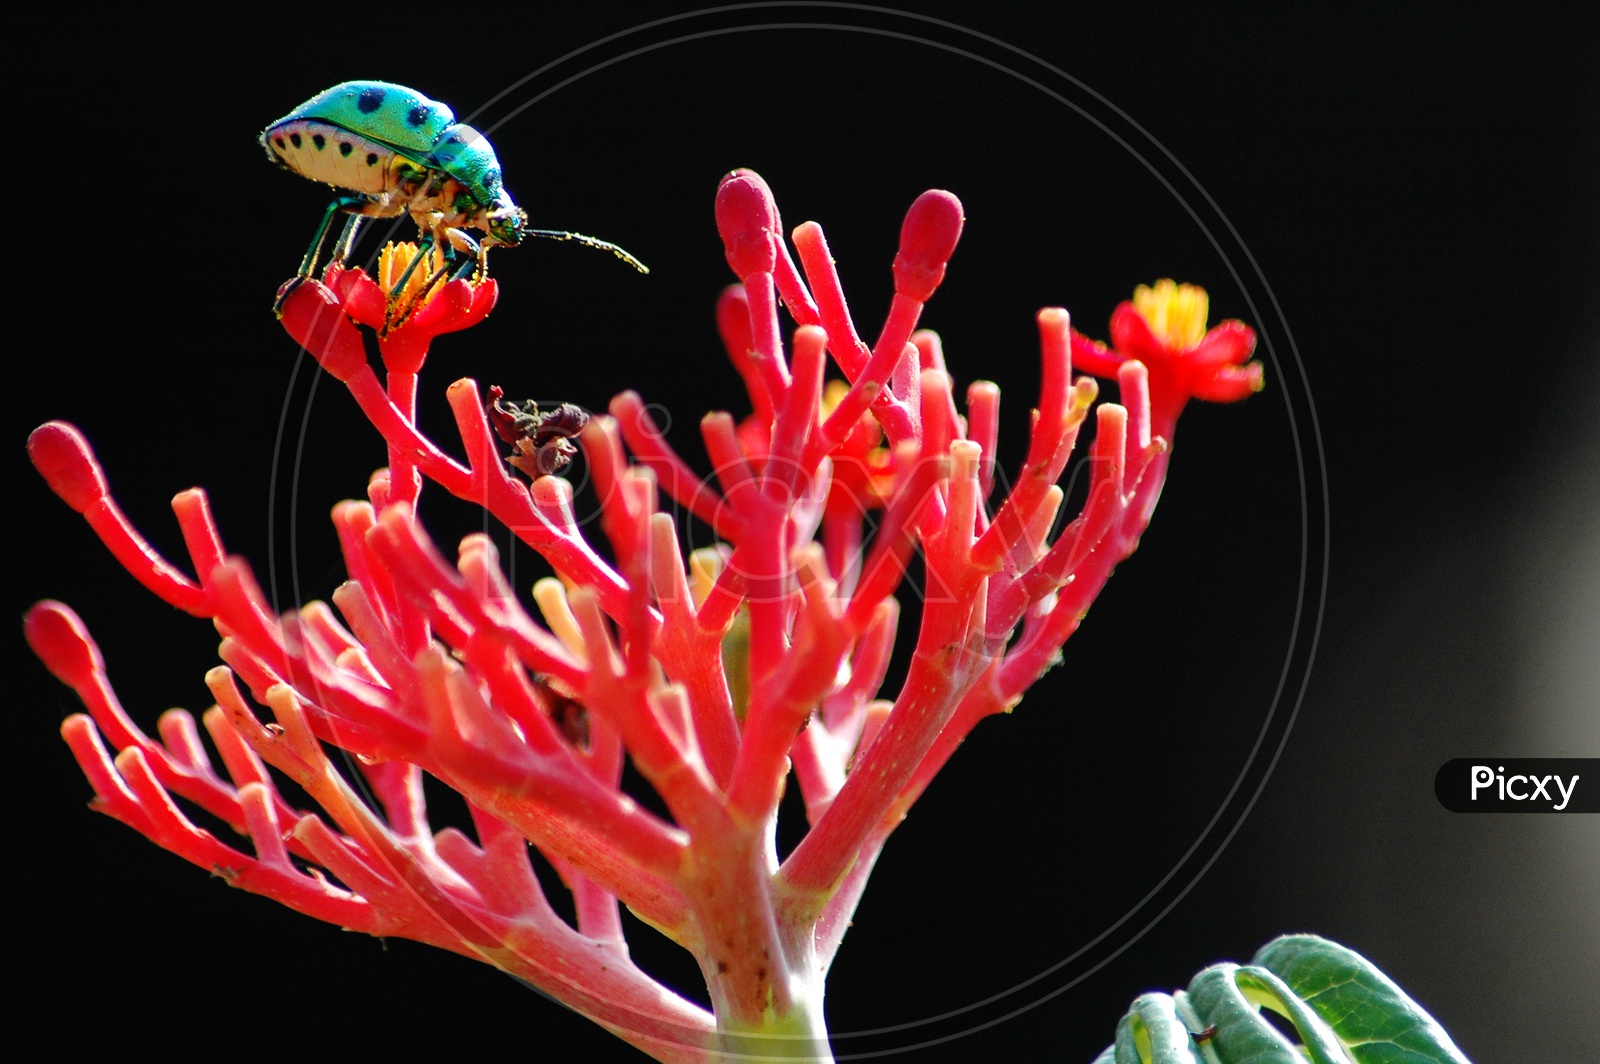 Green beetle on a red flower